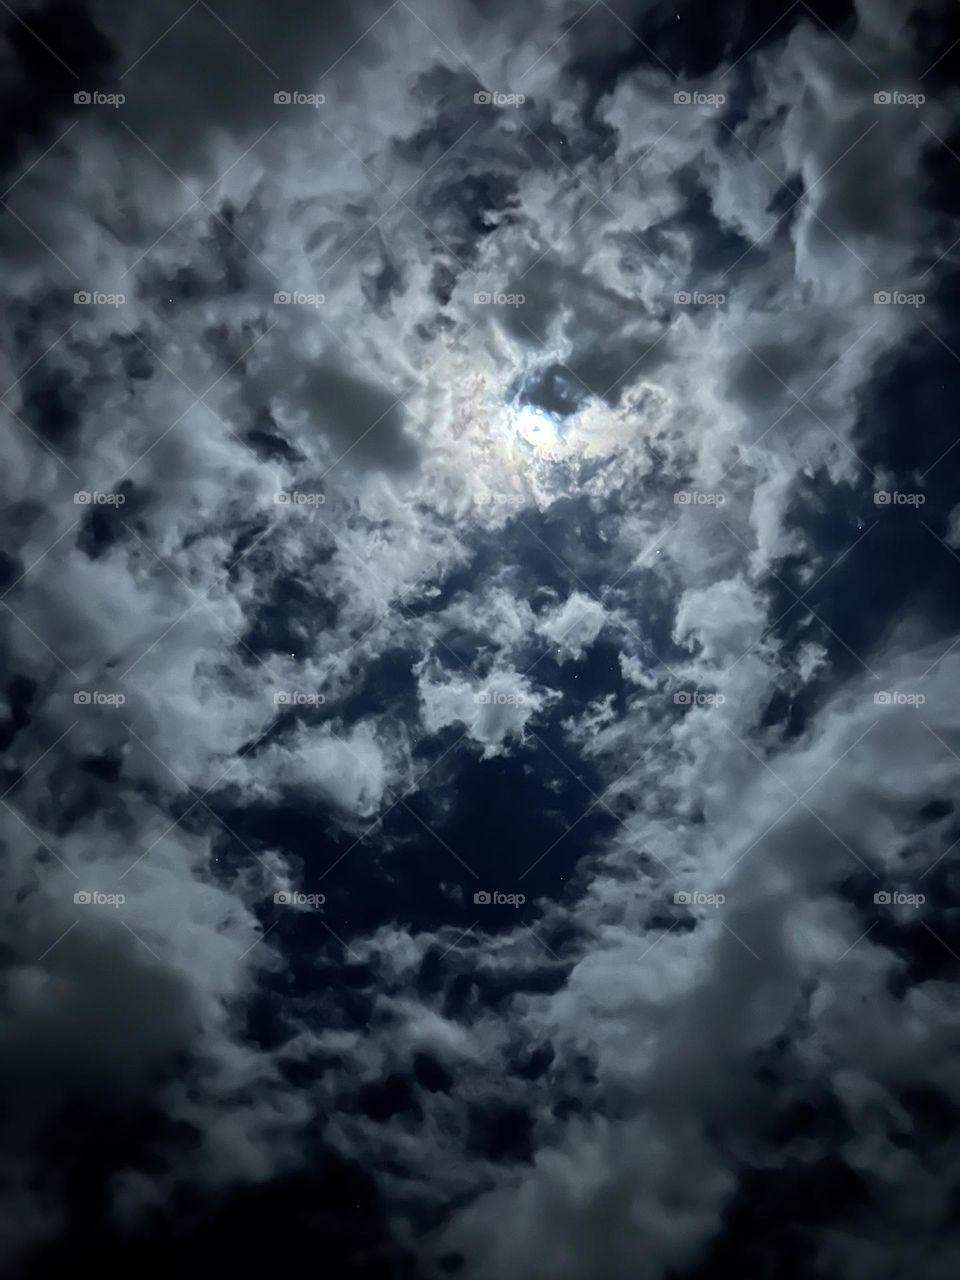 Clouds hiding the moon